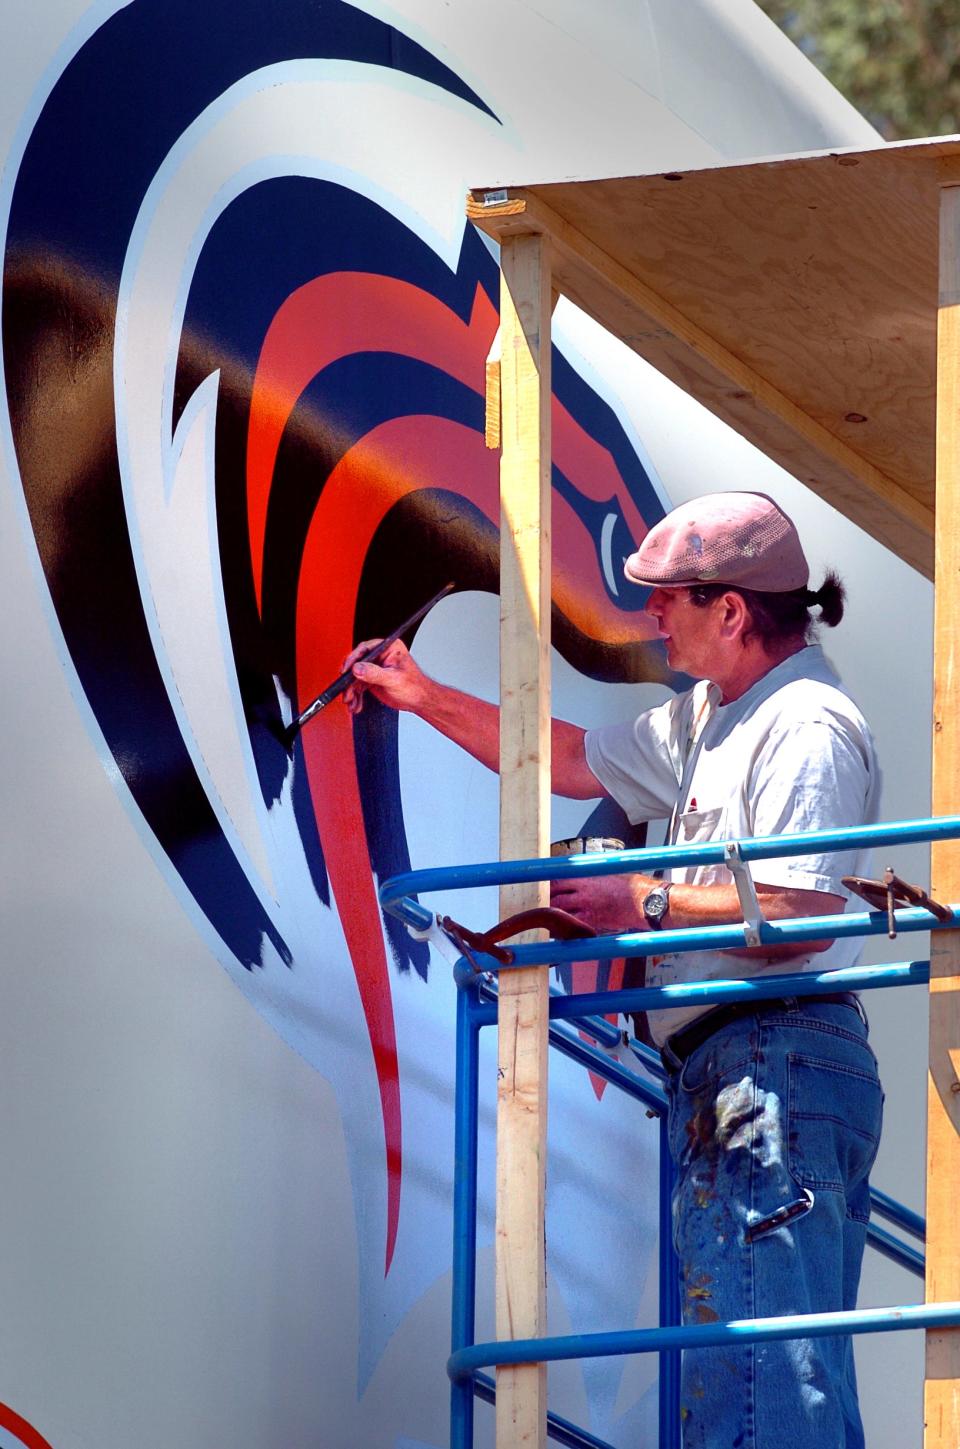 Stockton artist Carlos Lopez works on painting a 15' x 18' mural of the University of the Pacific logo and name on one of the water tanks on Feather River Drive near I-5 in Stockton on Aug. 26, 2005. Lopez has already painted the logo of Stockton's indoor soccer team, the California Cougars ,on the tank and will paint the logo of Stockton's hockey team, The Stockton Thunder next week.